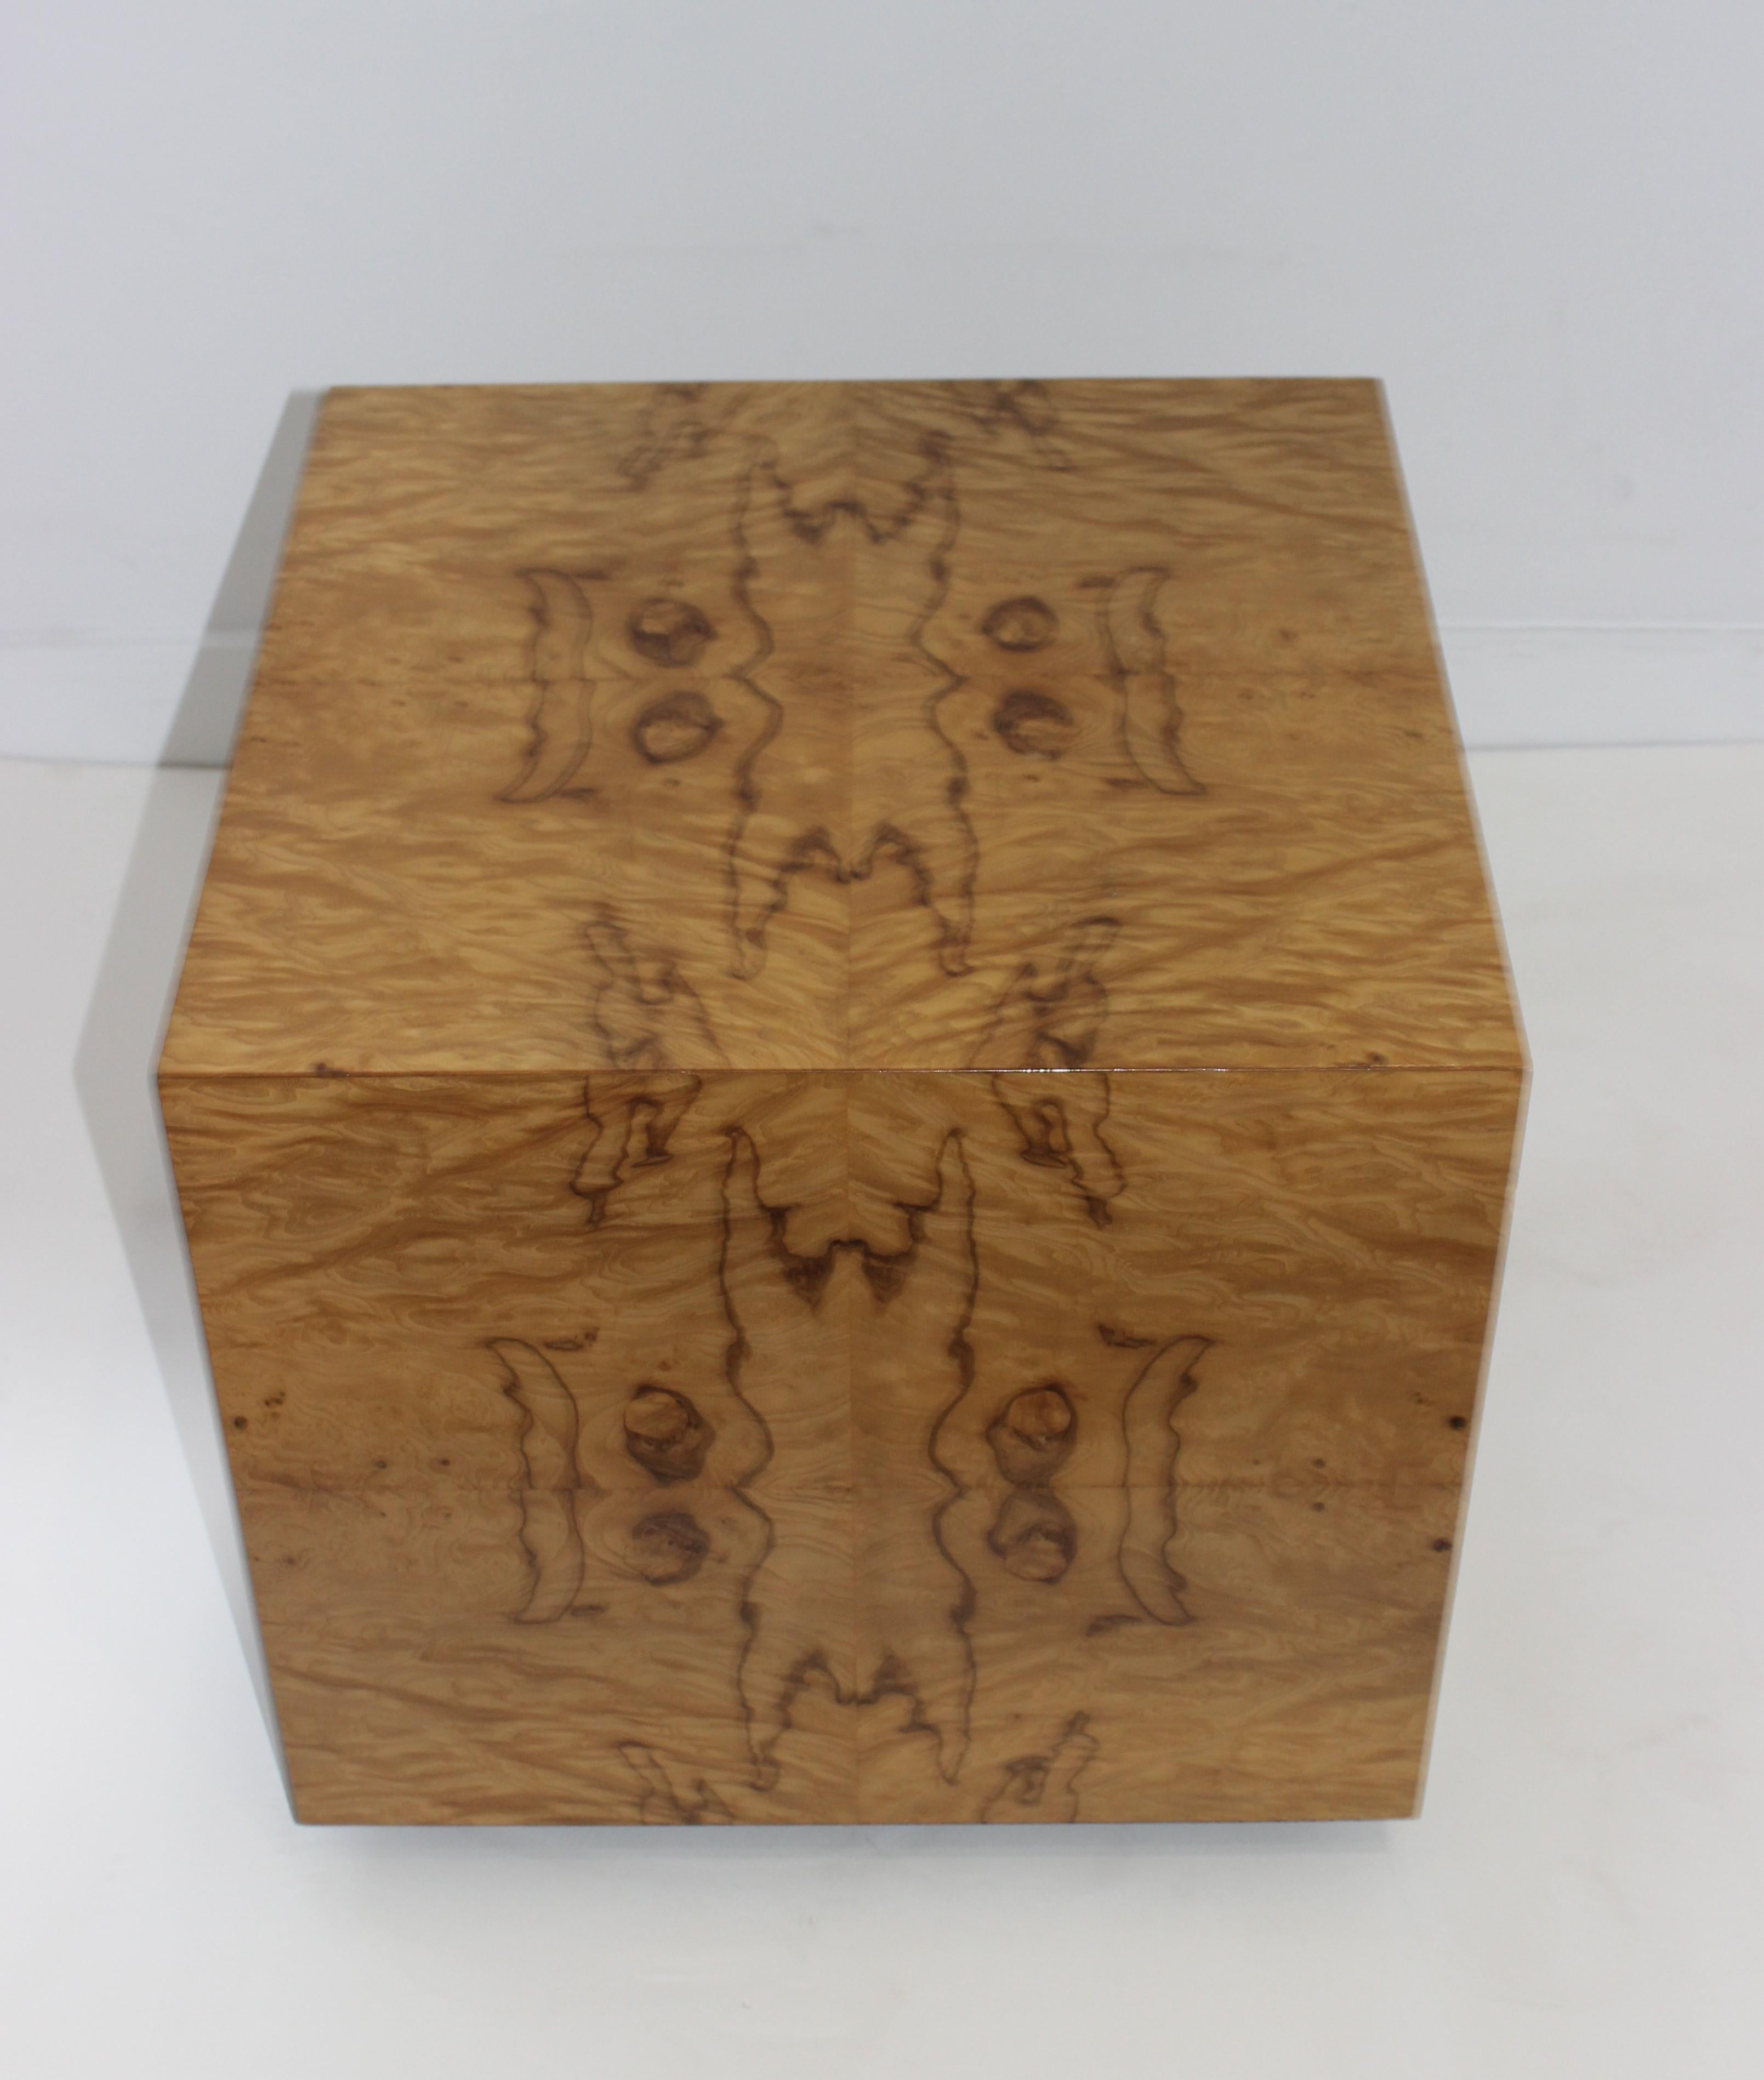 Milo Baughman burl olive wood cube side table from a palm beach estate. Sits on a low black inset stand.